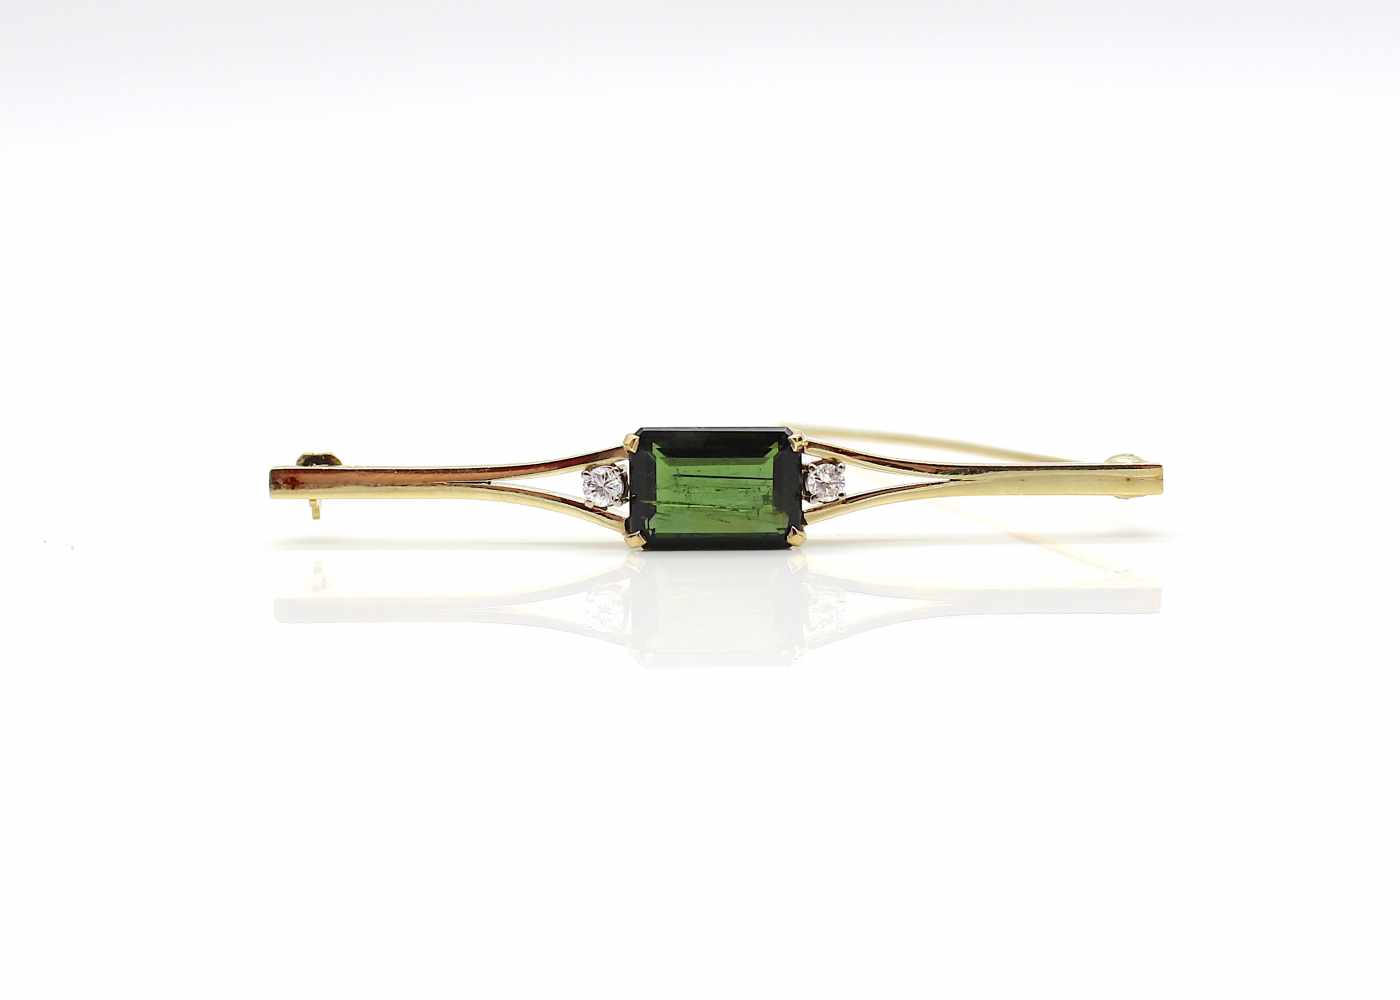 Needle made of 585 gold with a tourmaline approx. 4 ct and 2 diamonds each 0.07 ct,Weight 7.2 g, - Image 3 of 3